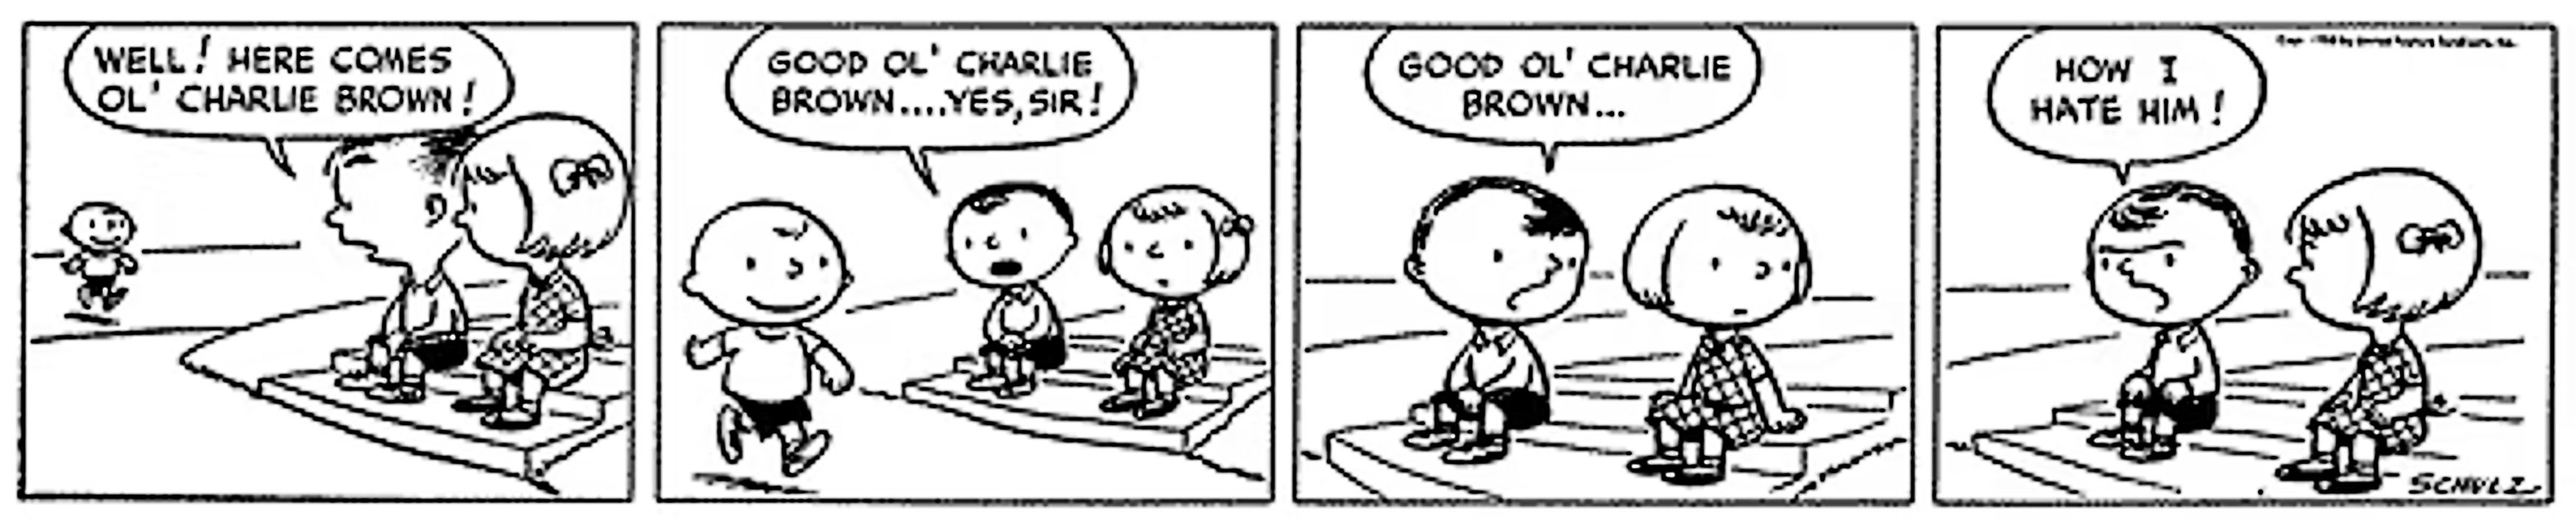 Peanuts, first ever strip, featuring Charlie Brown as a passerby, rather than protagonist